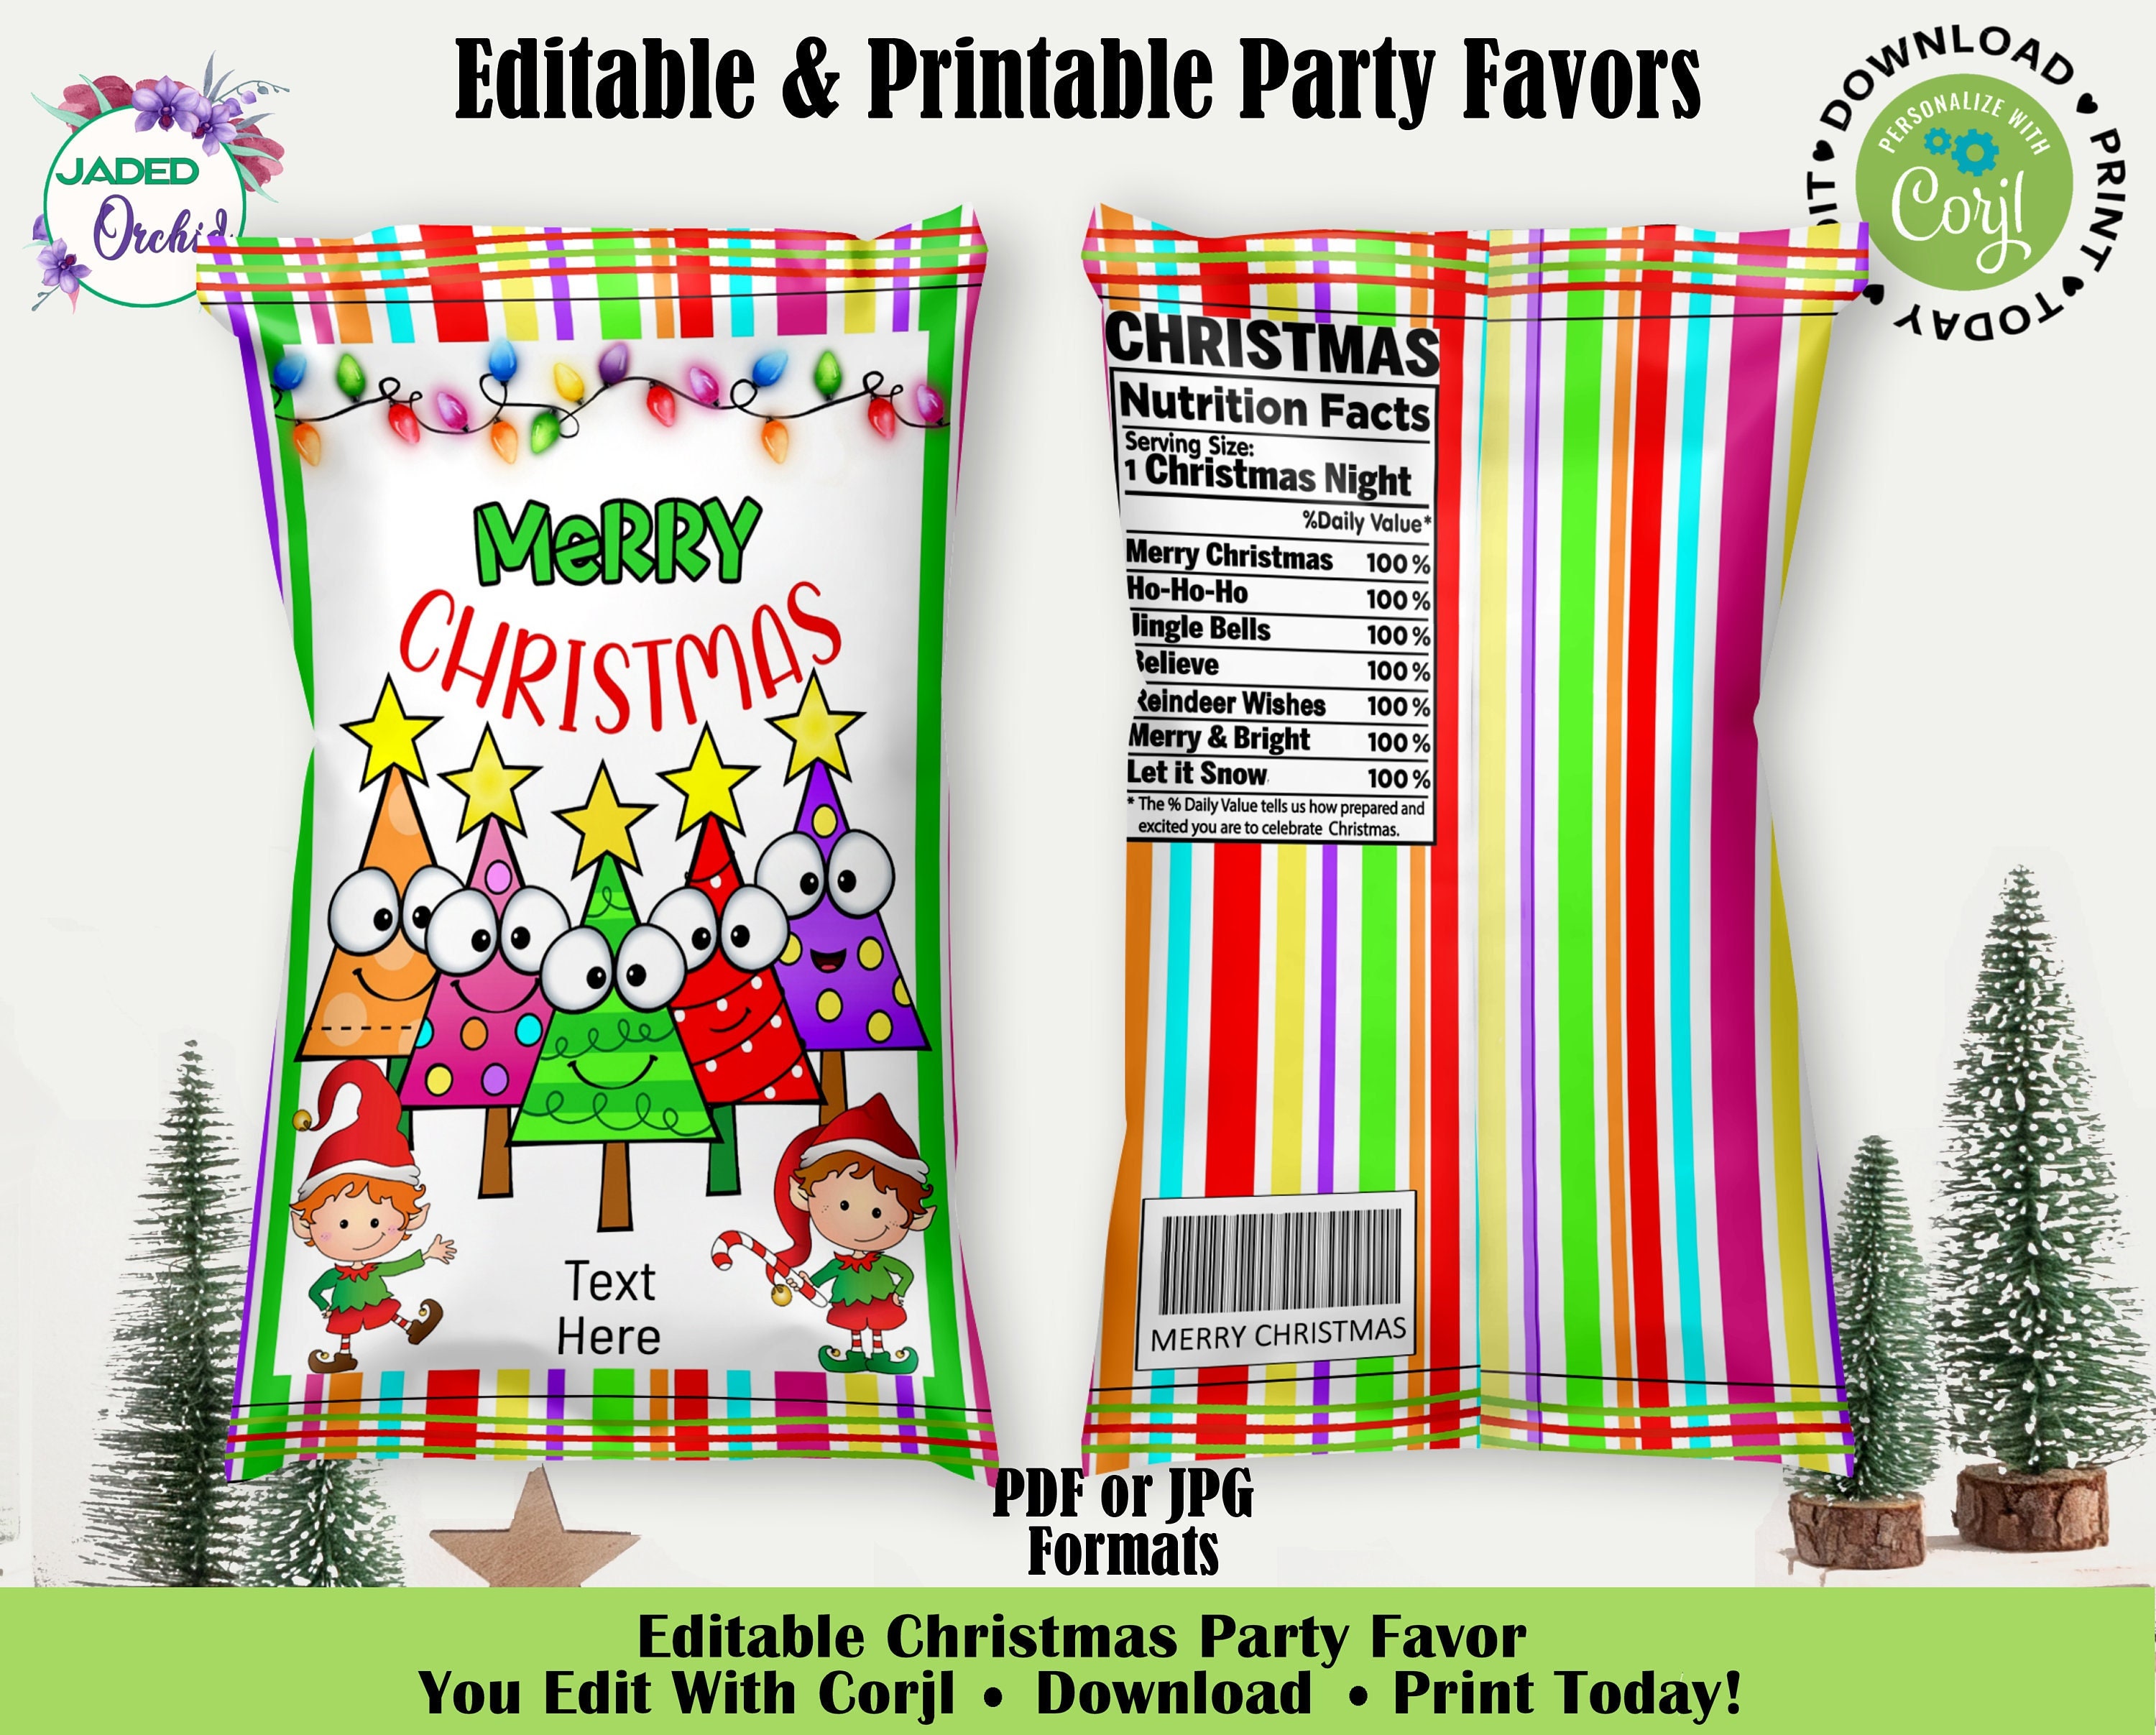 Christmas Chip Bag Wrapper EDITABLE Template. Personalised Party